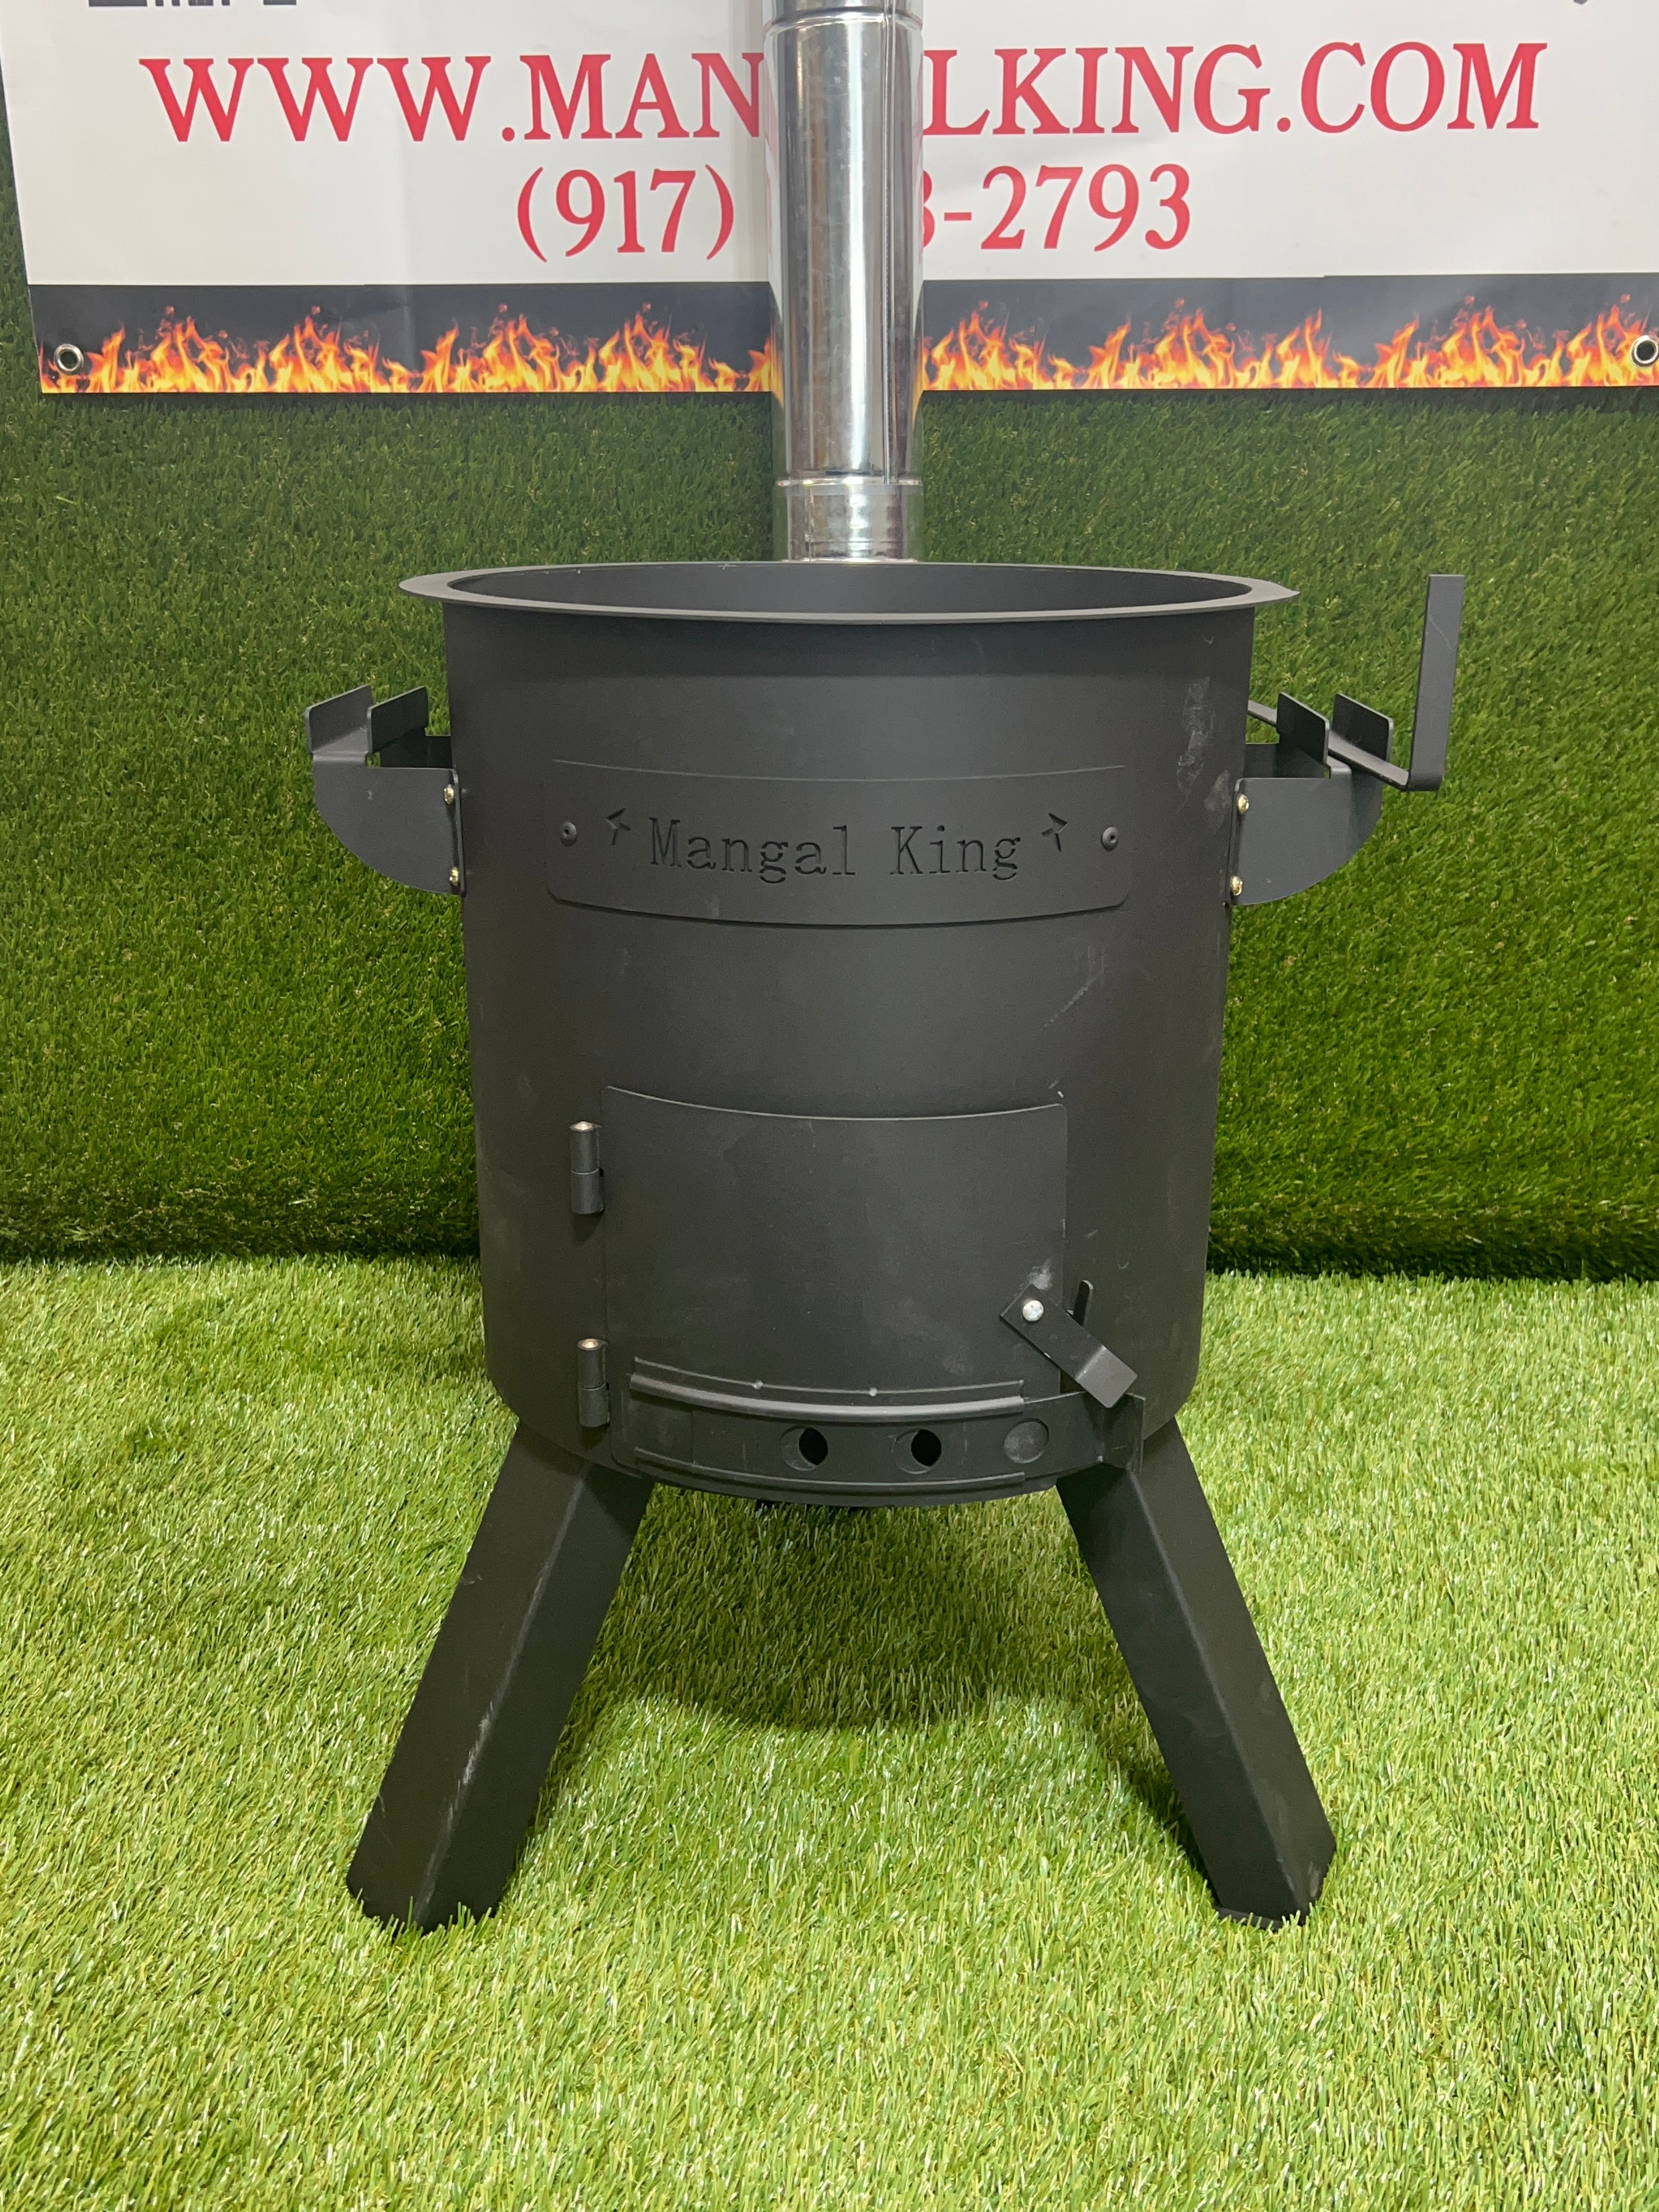 Uchag Oshton with chimney and damper wood burning oven for Cast iron Kazan for making Plov by Mangal King